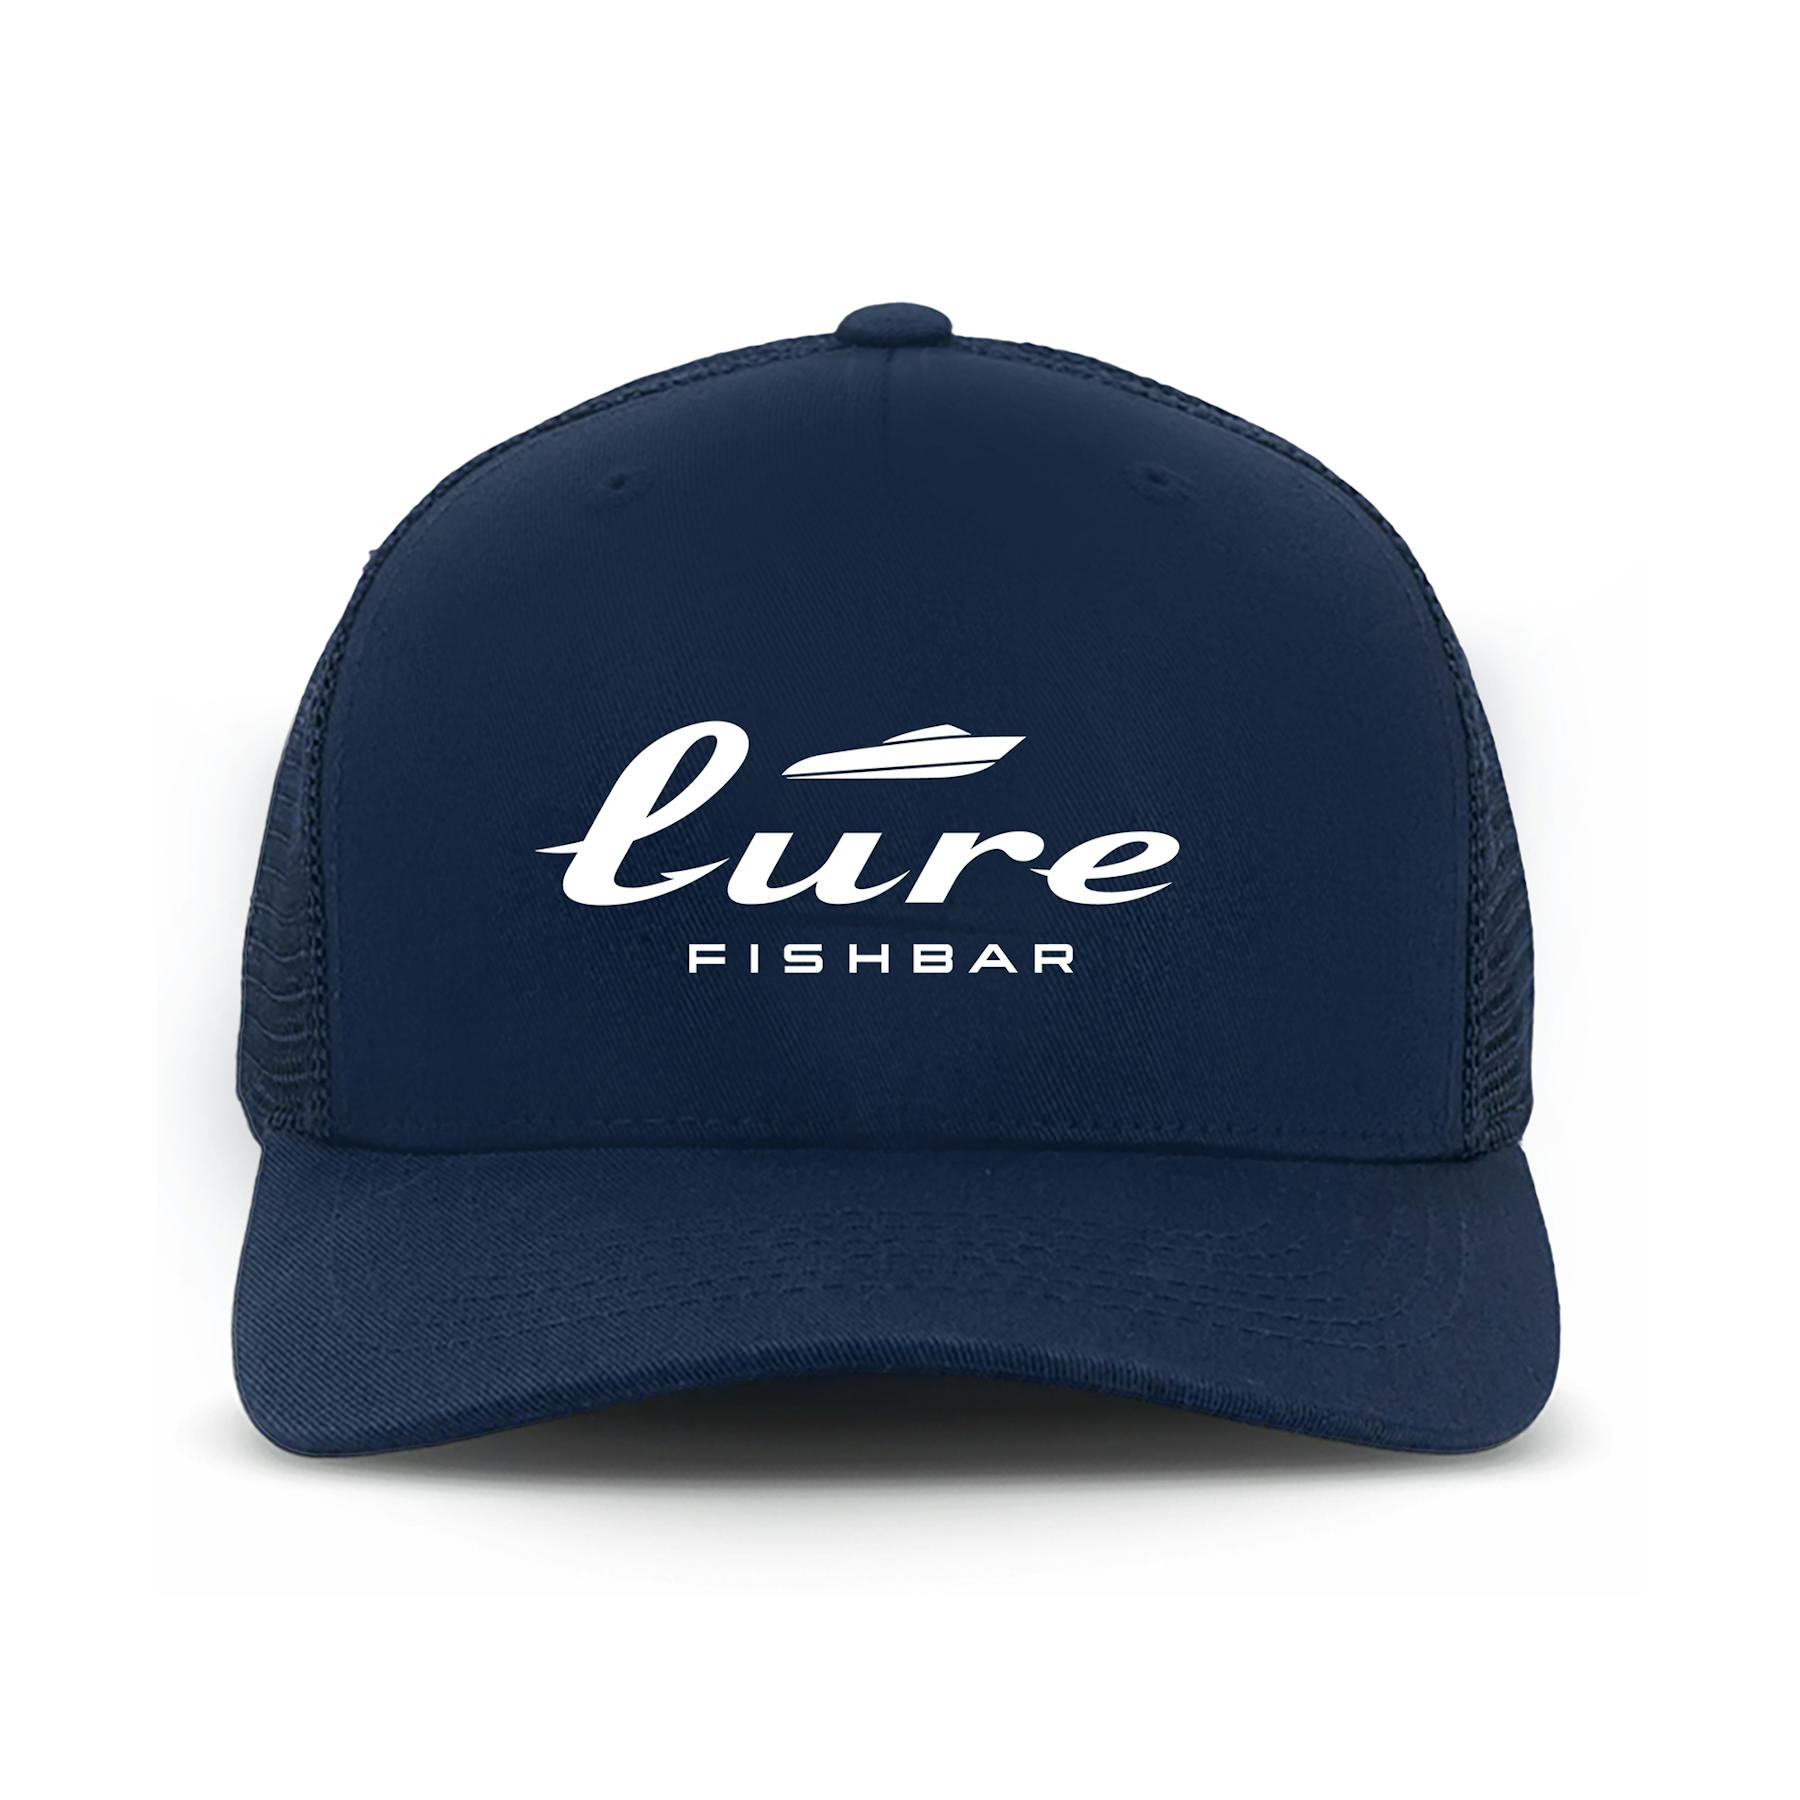 Lure Fish House Gift Cards and Gift Certificates